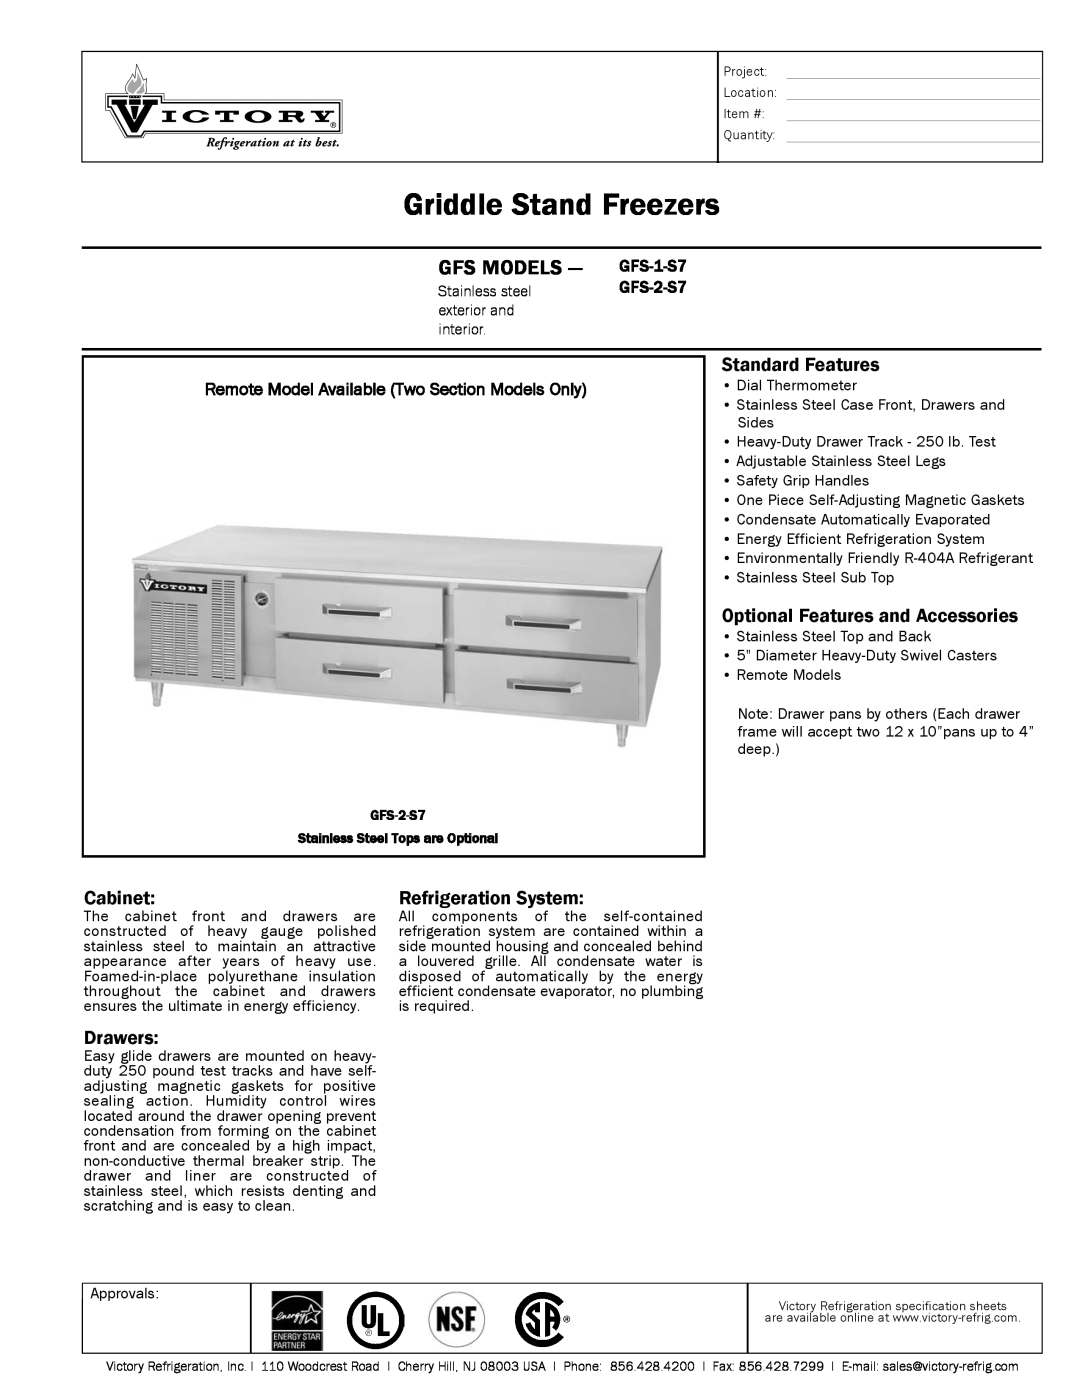 Victory Refrigeration GFS-2-S7 specifications Griddle Stand Freezers, GFS MODELS - GFS-1-S7, Standard Features, Cabinet 